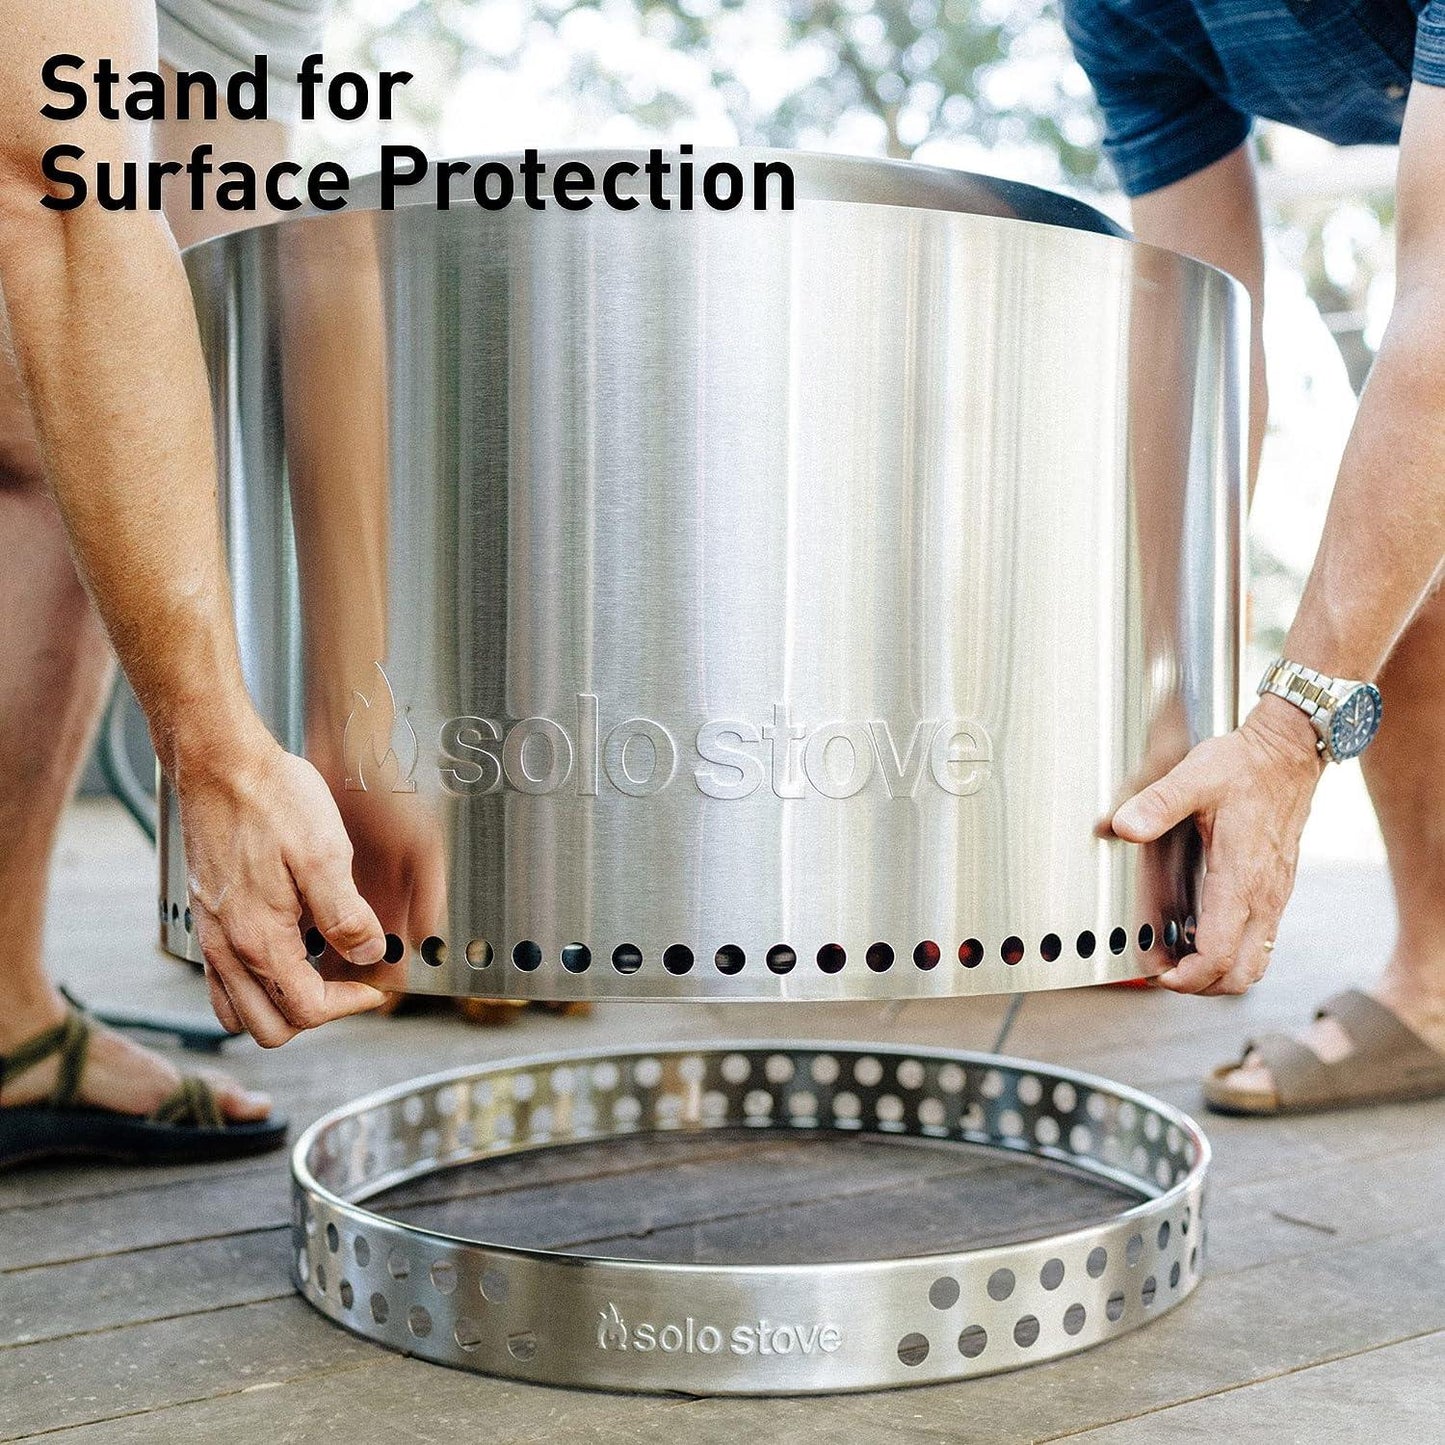 Solo Stove Ranger/Bonfire/Yukon 2.0 with Stand, Smokeless Fire Pit | Wood Burning Fireplaces with Removable Ash Pan, Portable Outdoor Firepit - Ideal for Camping & Outdoor Spaces, Stainless Steel